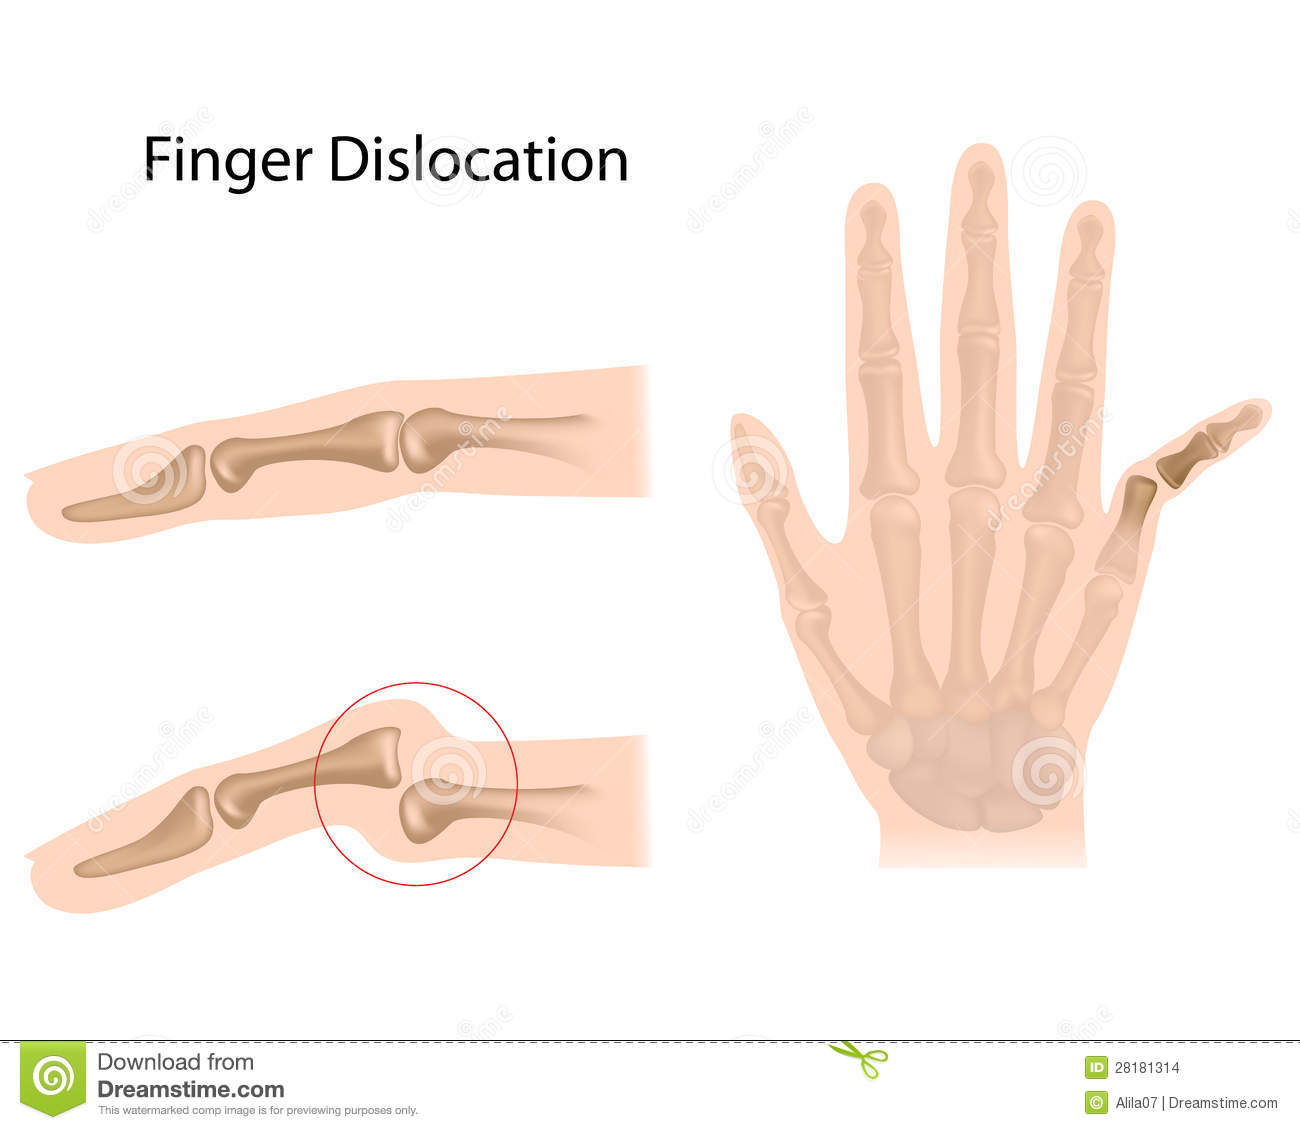 Dislocation Of Bones At Different Finger Joints Eps10